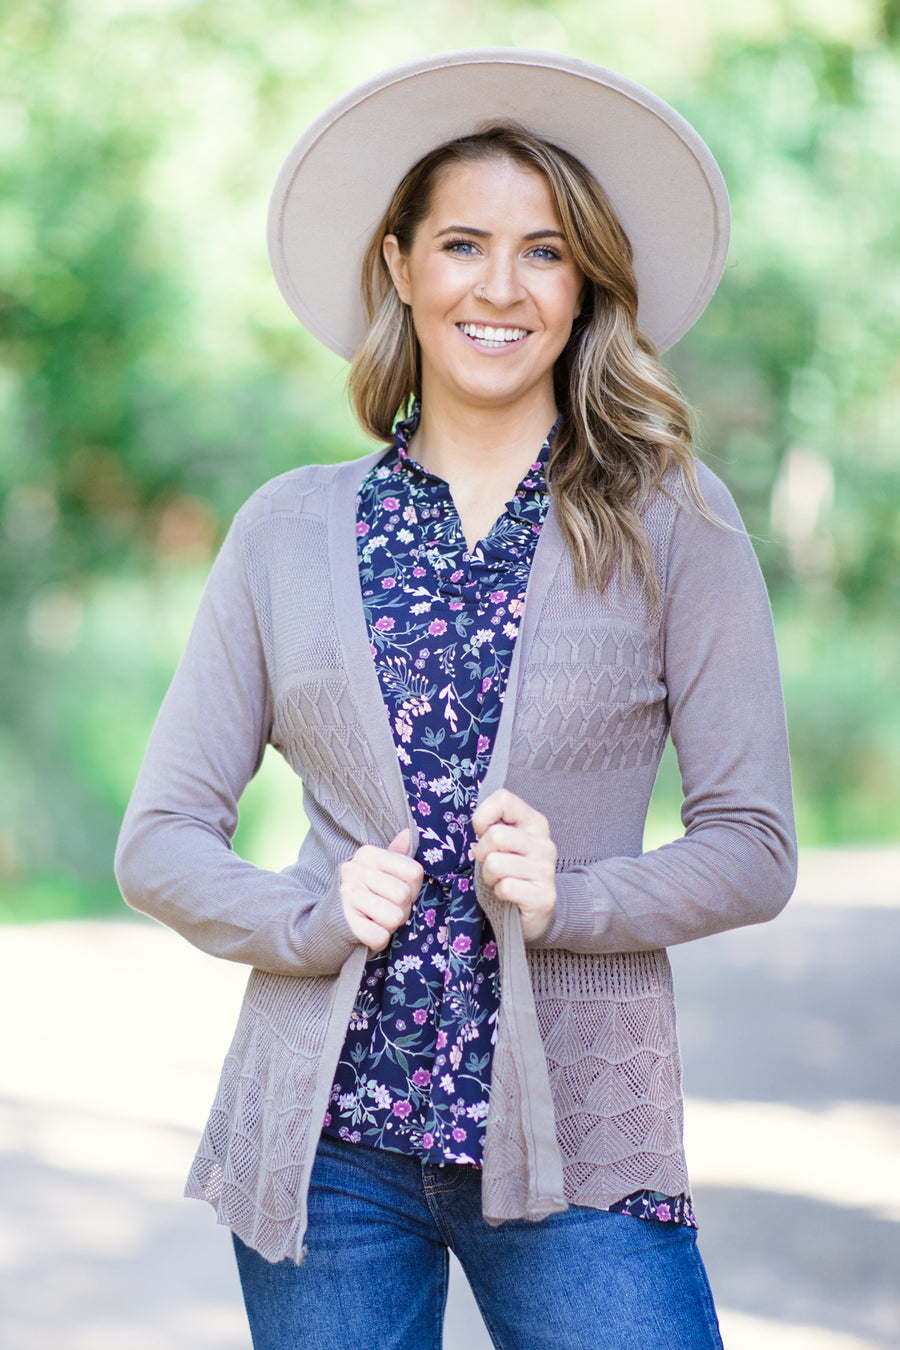 Mocha Scalloped Crochet Lace Trim Cardigan - Filly Flair